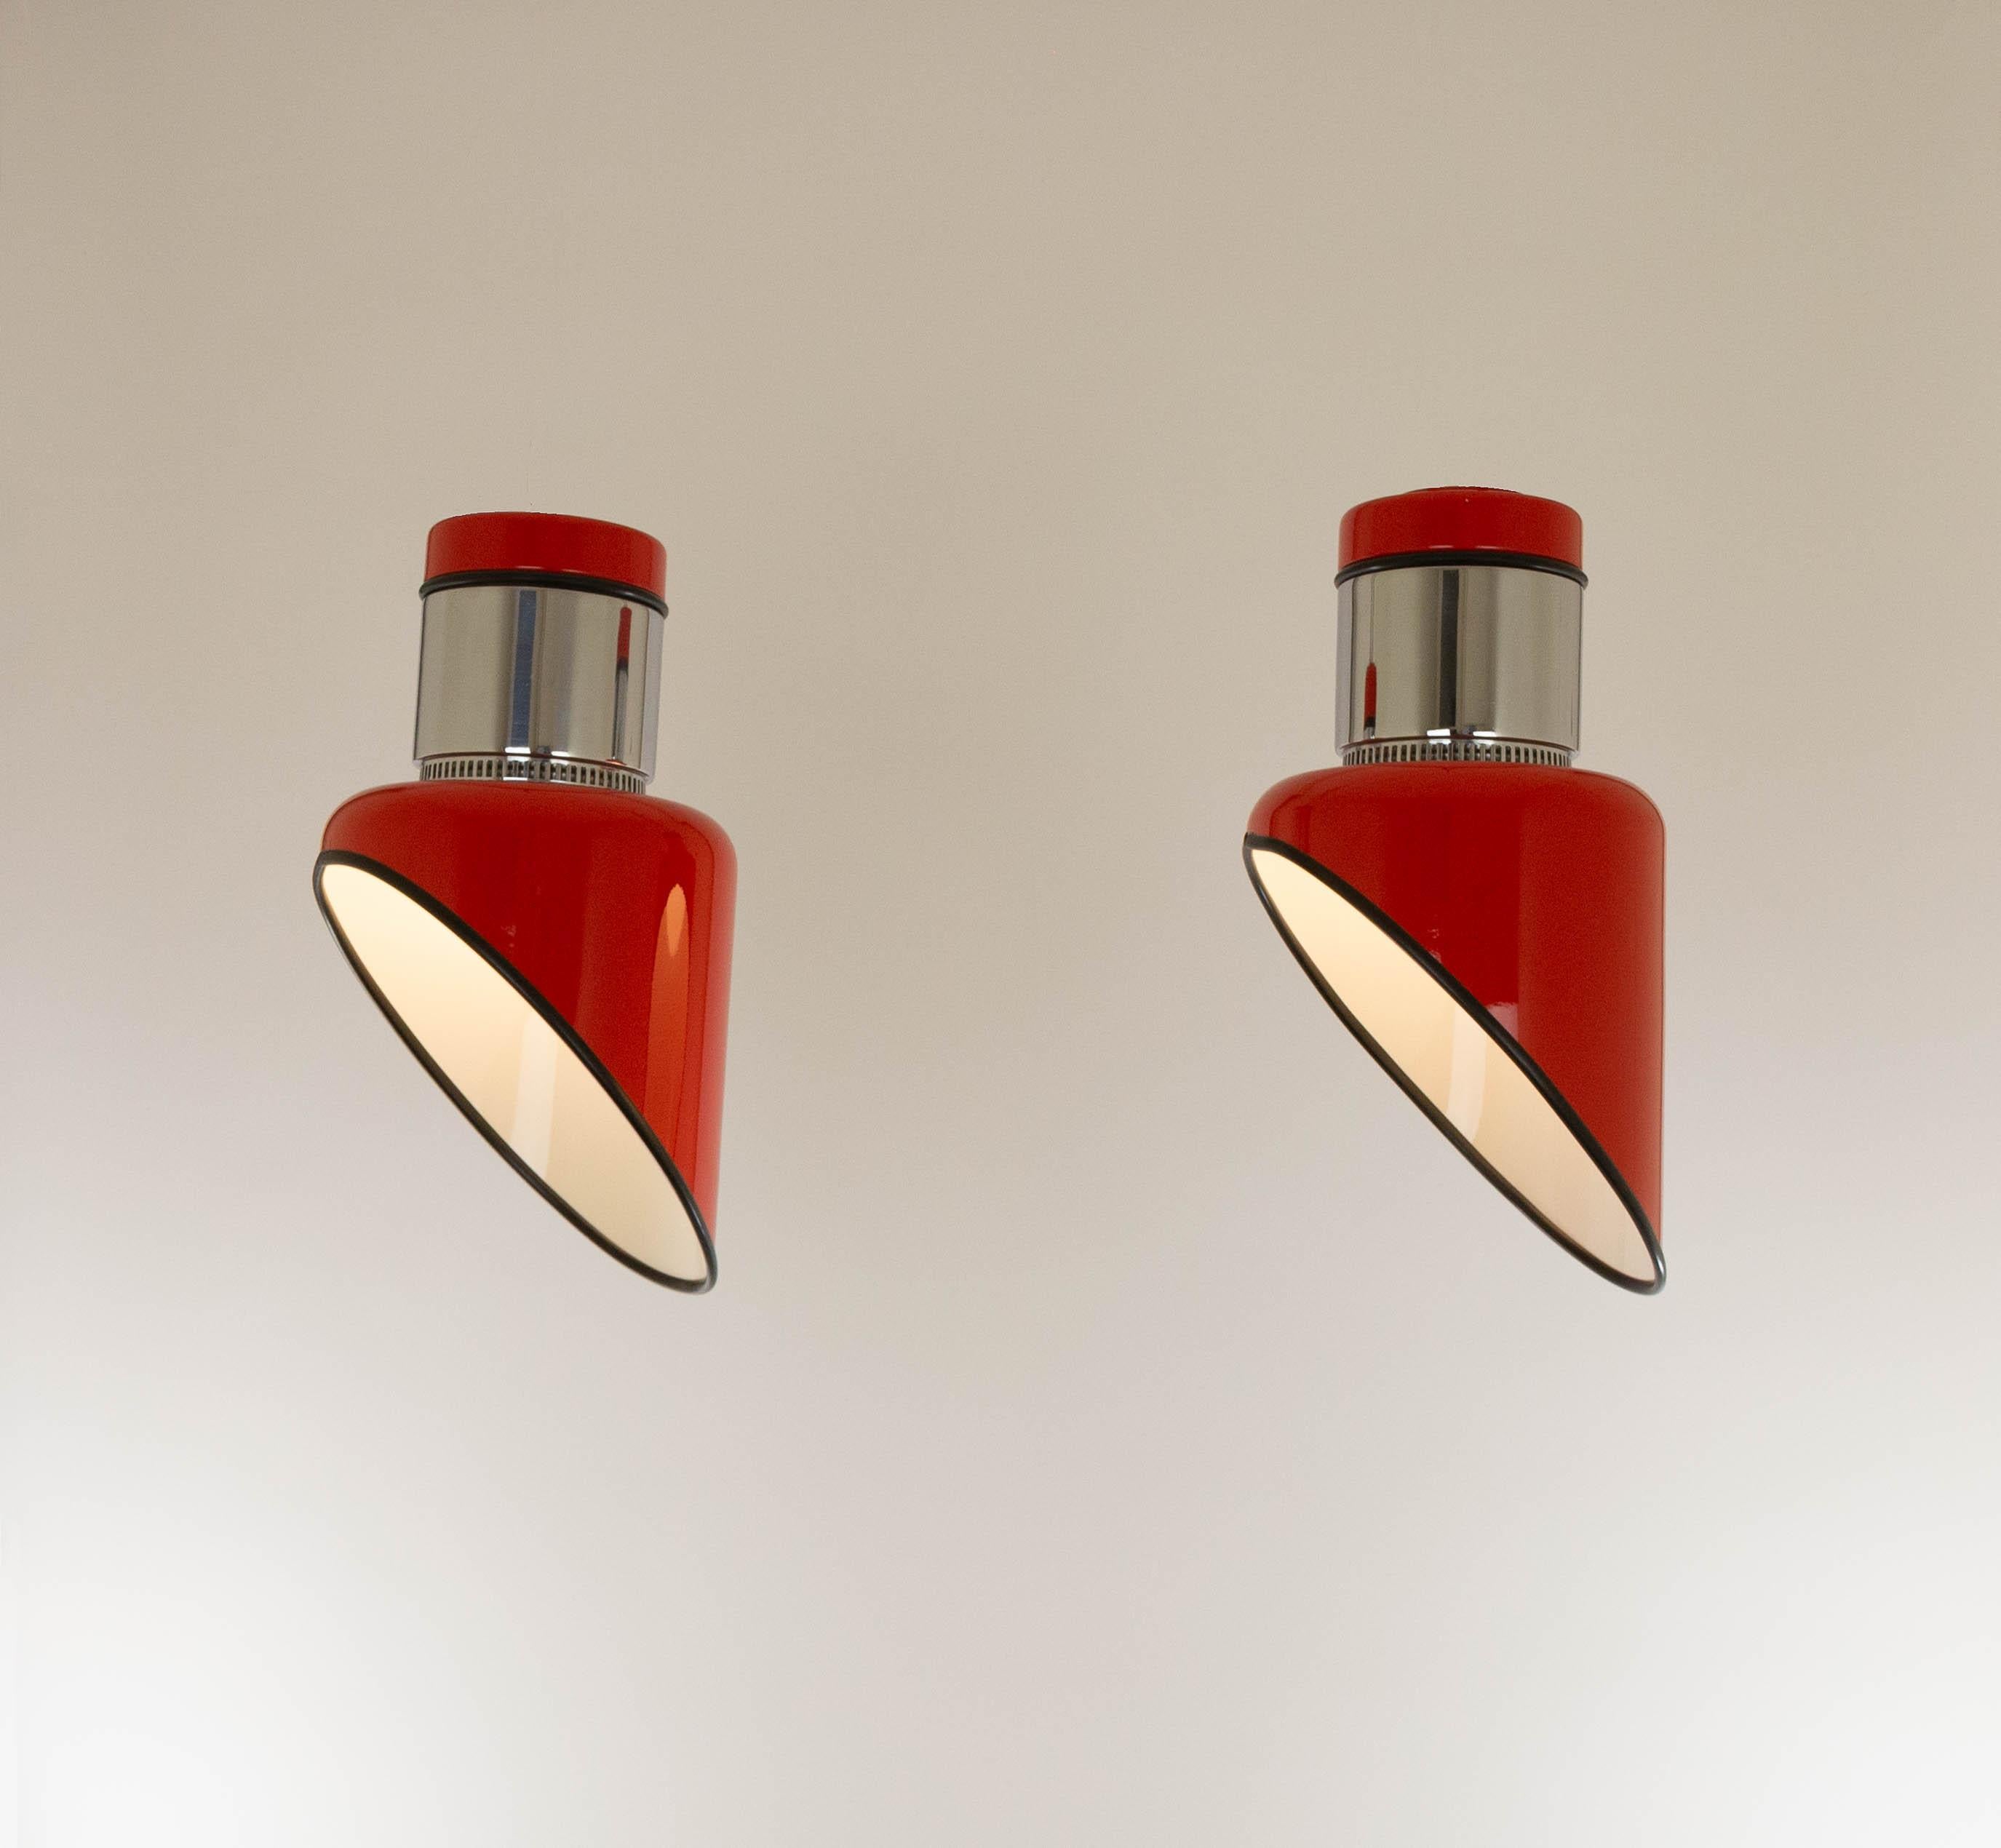 A pair of Sisten ceiling lamps designed by Gianni Celada and produced by Fontana Arte in the 1970s.

These Sisten ceiling lamps are part of the Sisten series; consisting of various wall and ceiling lamps, all with (interchangeable) opaline glass